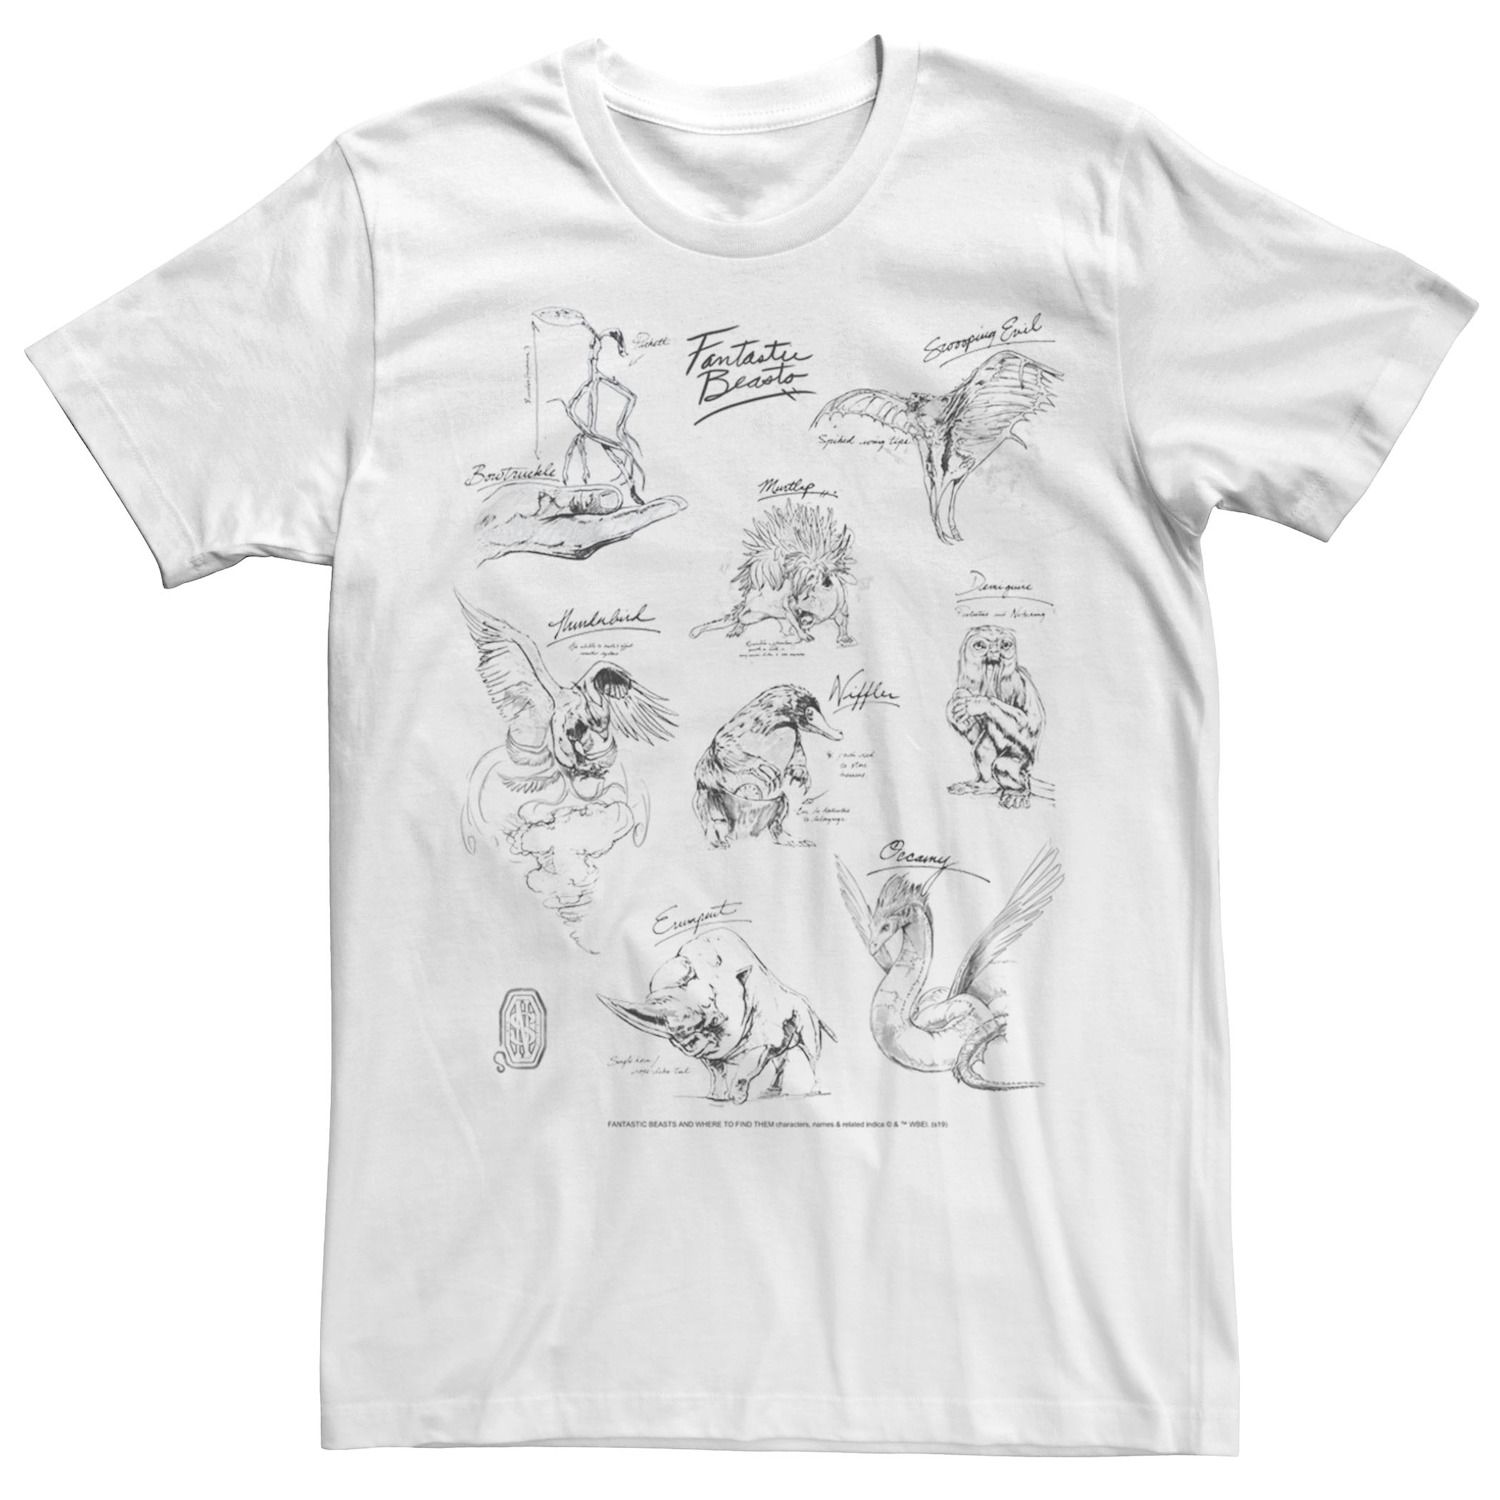 Image for Harry Potter Men's Fantastic Beasts Animal Sketch Collage Graphic Tee at Kohl's.